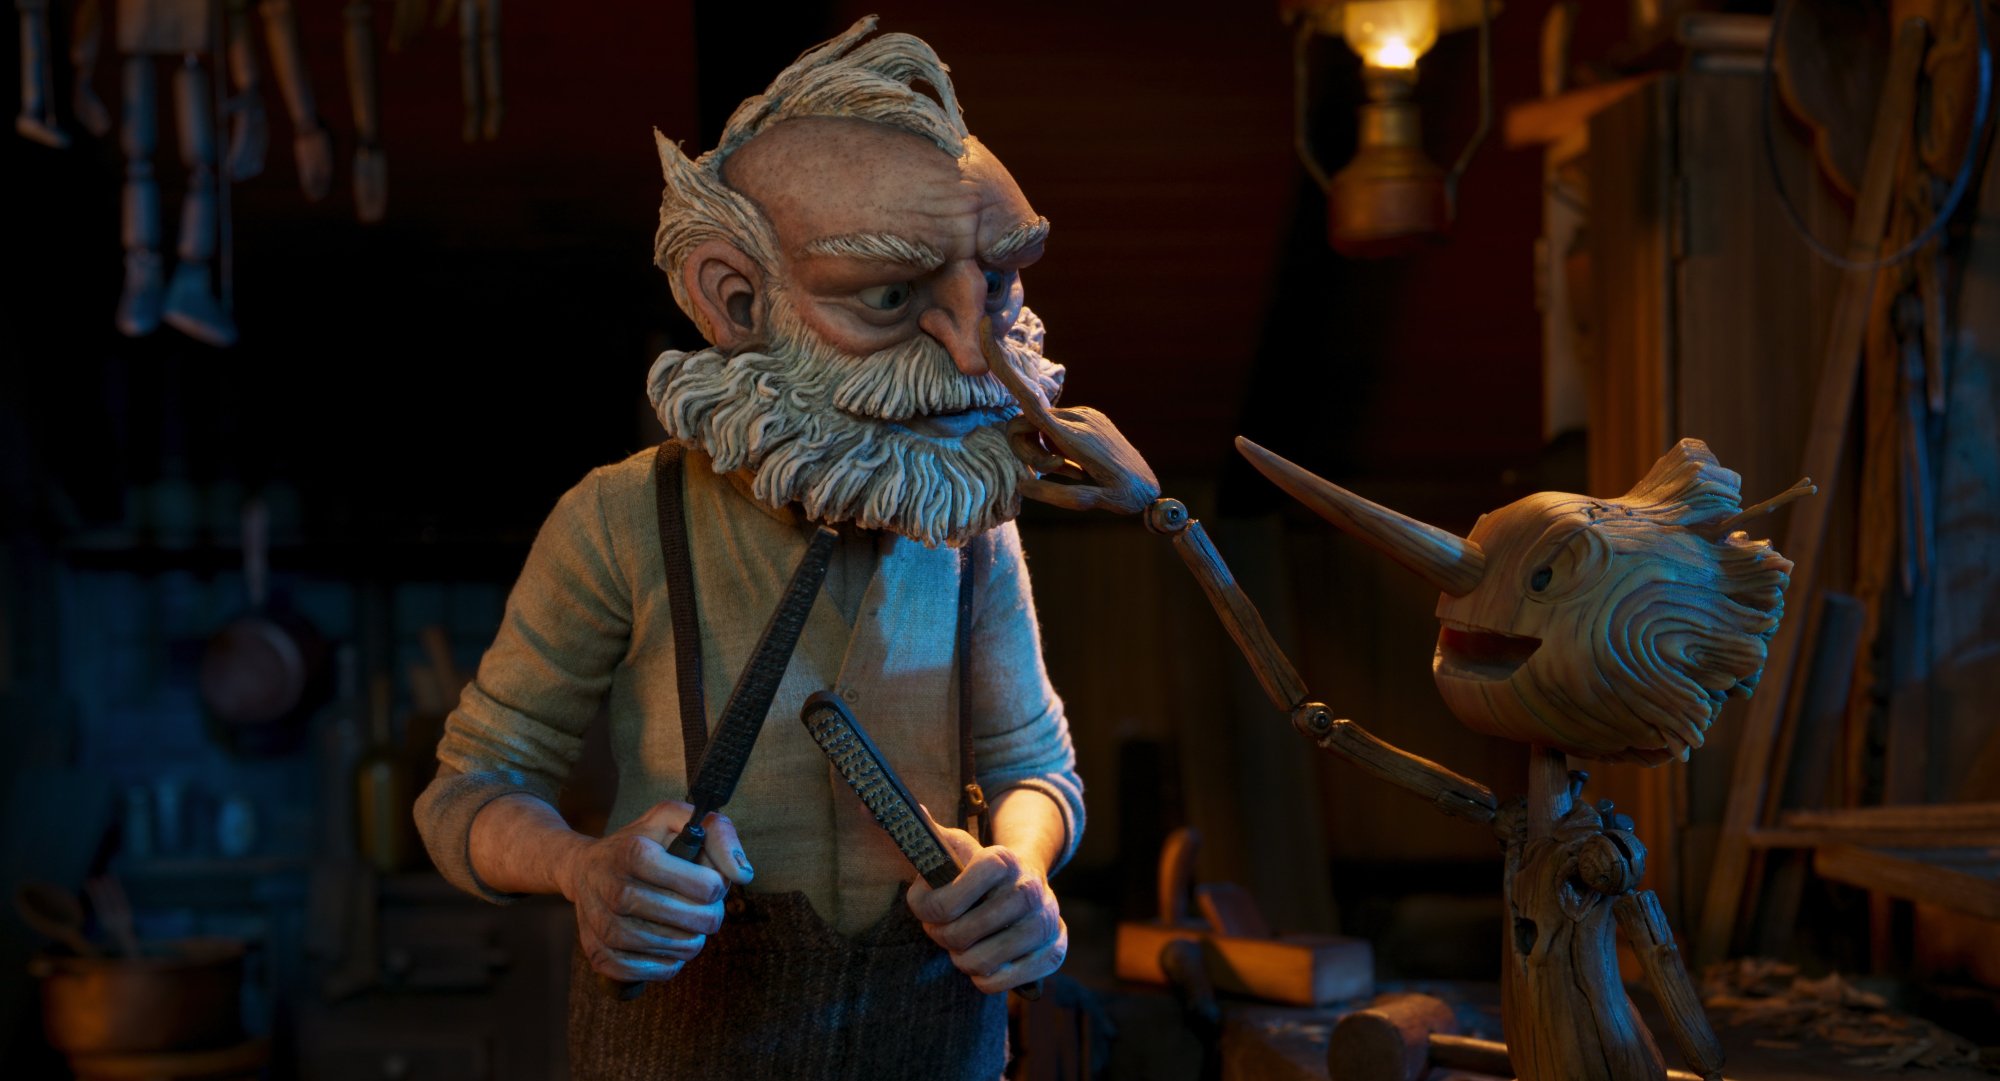 'Guillermo del Toro's Pinocchio' Geppetto (voiced by David Bradley) and Pinocchio (voiced by Gregory Mann). Pinocchio is reaching out, touching Geppetto's nose.